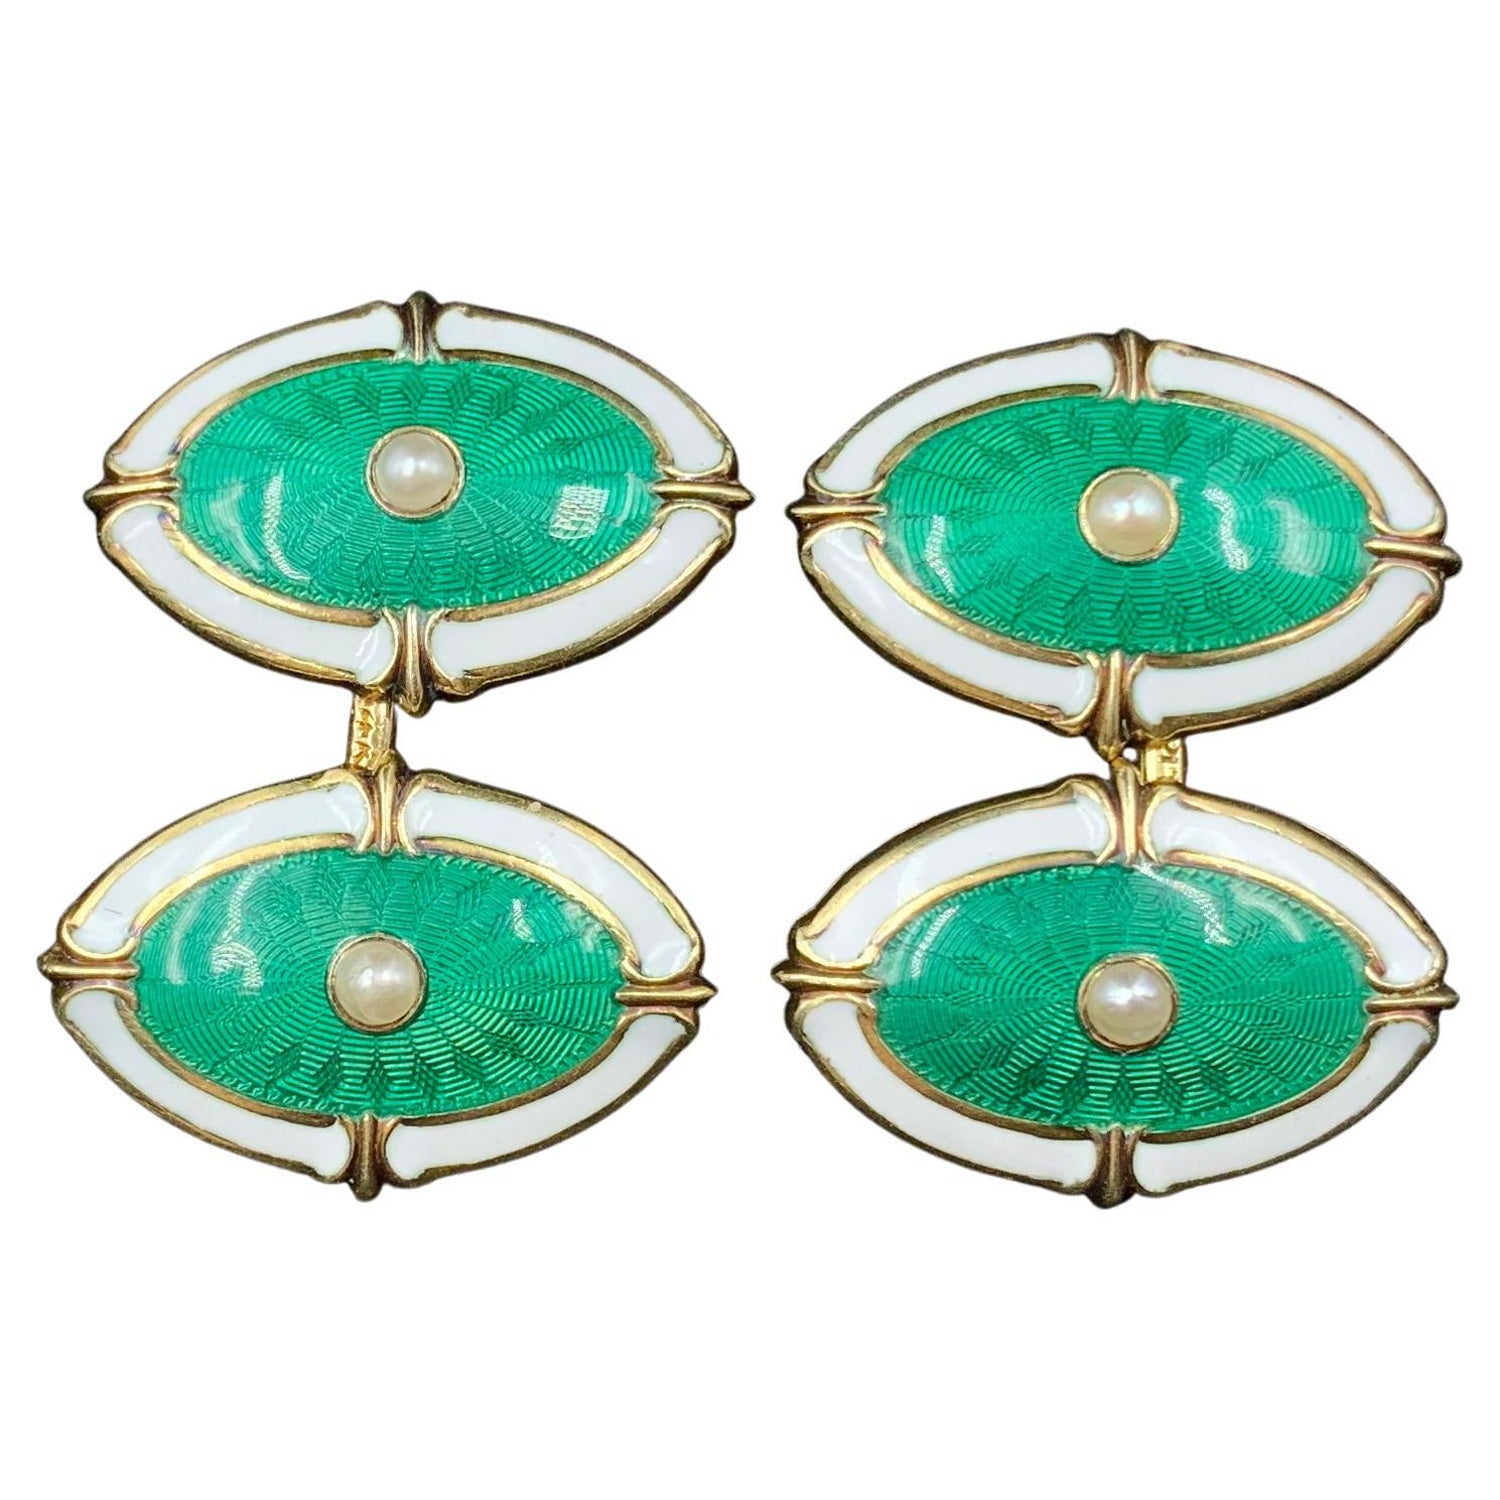 Antique Faberge Cufflinks - 4 For Sale on 1stDibs | faberge cufflinks  antique, faberge cufflinks for sale